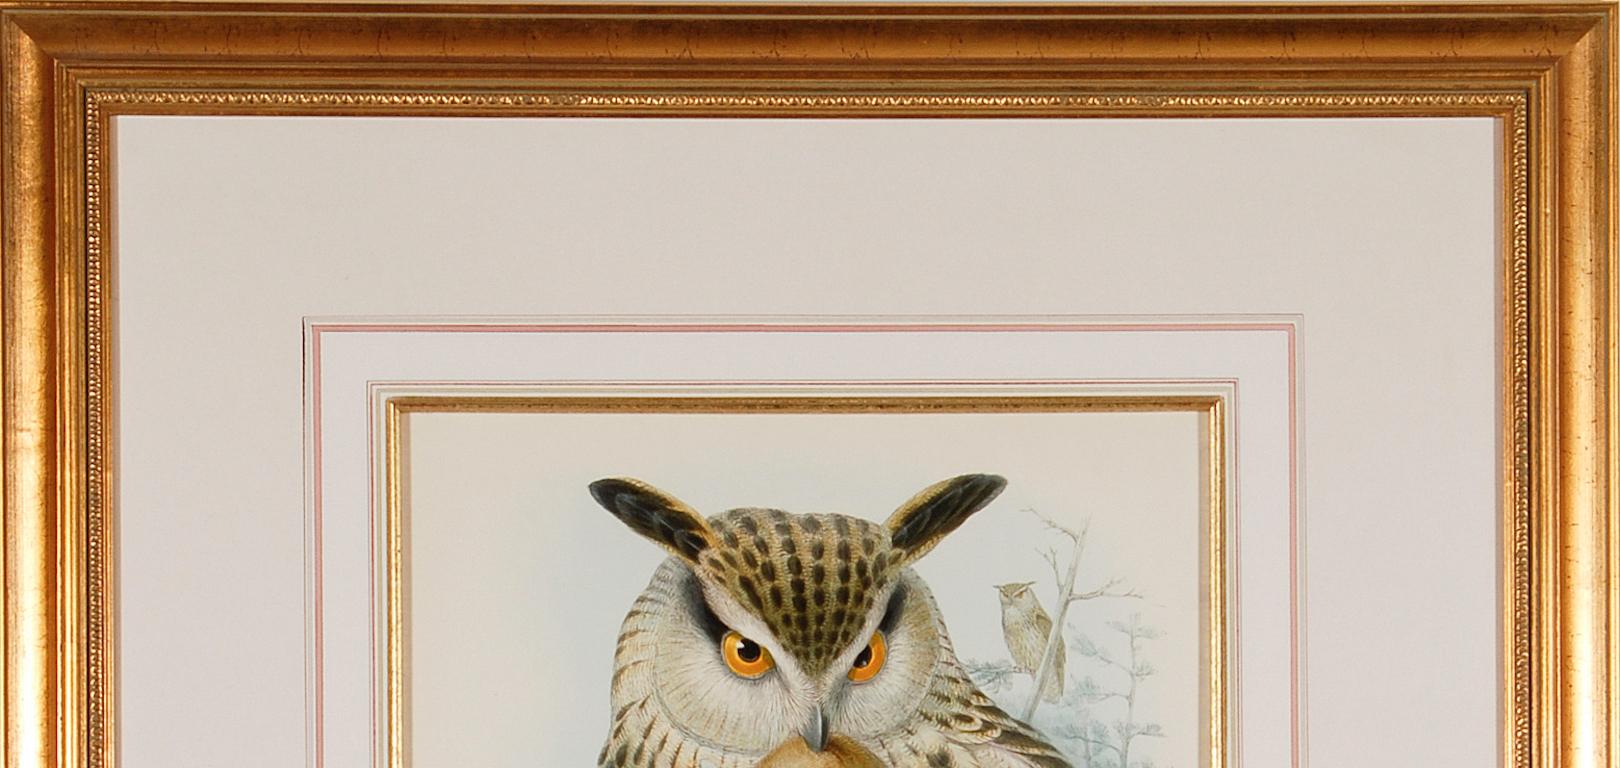 Eagle or Horned Owl: A Framed Original 19th C. Hand-colored Lithograph by Gould - Naturalistic Print by John Gould and Henry Constantine Richter